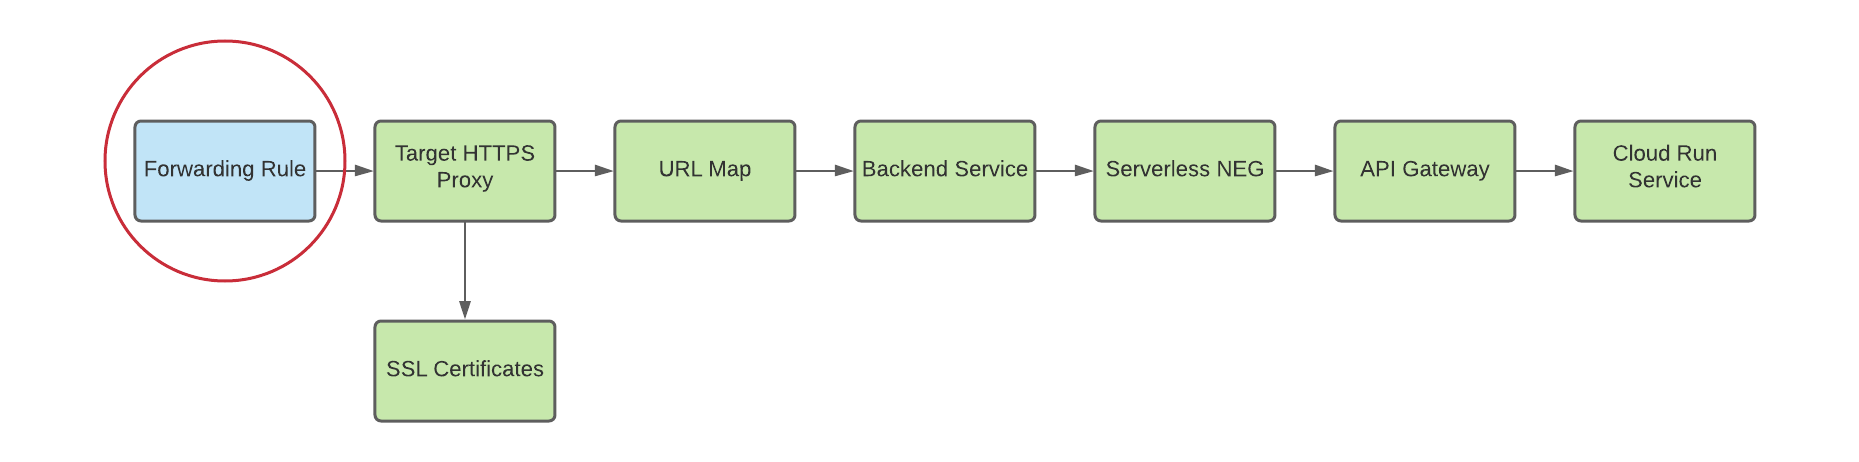 diagram of forwarding rule to http proxy